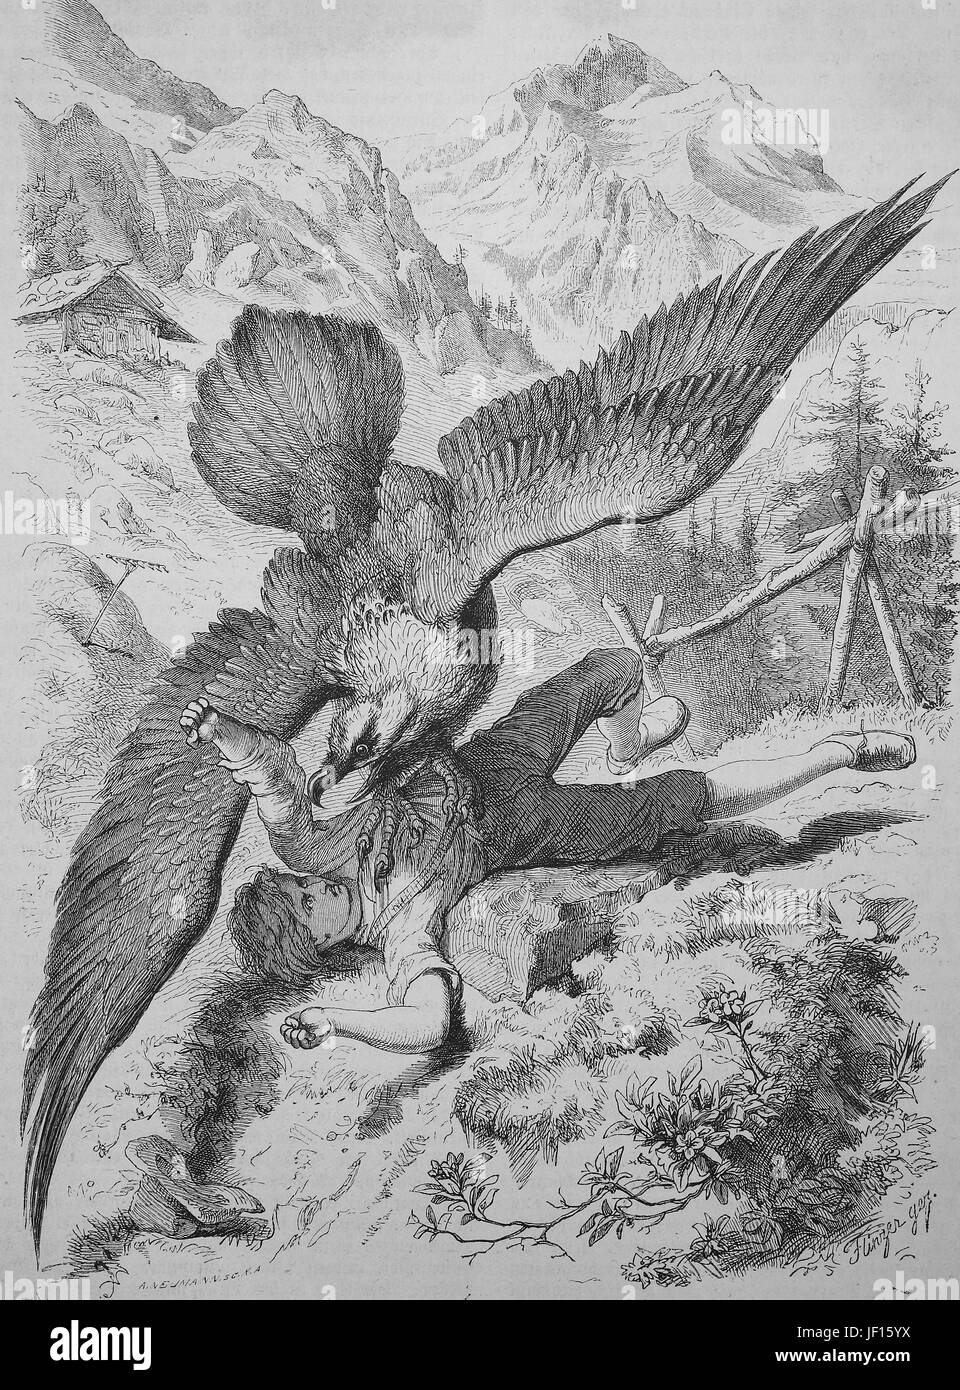 A vulture attacks a boy, historical illustration of the animal life in the alpine world, Digital improved reproduction from an original print from 1888 Stock Photo